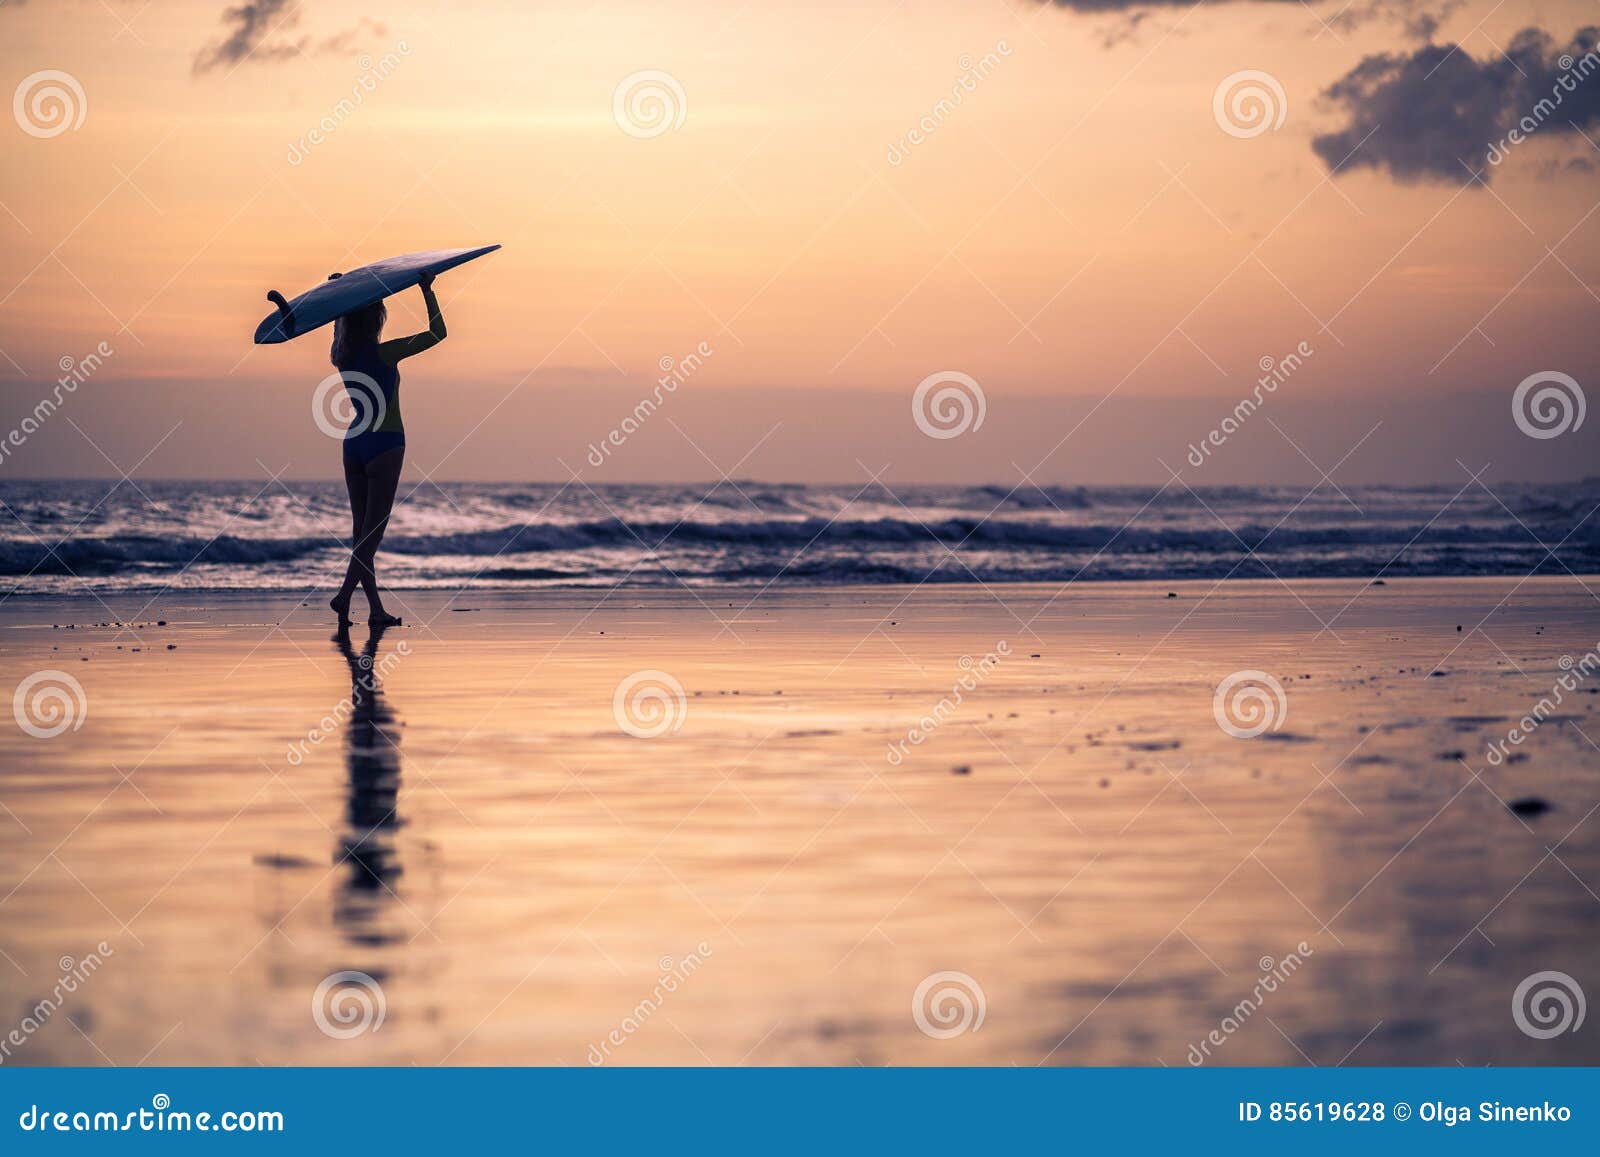 Silhouette Of Young Woman Walking Along The Beach At Sunset Stock Photo ...